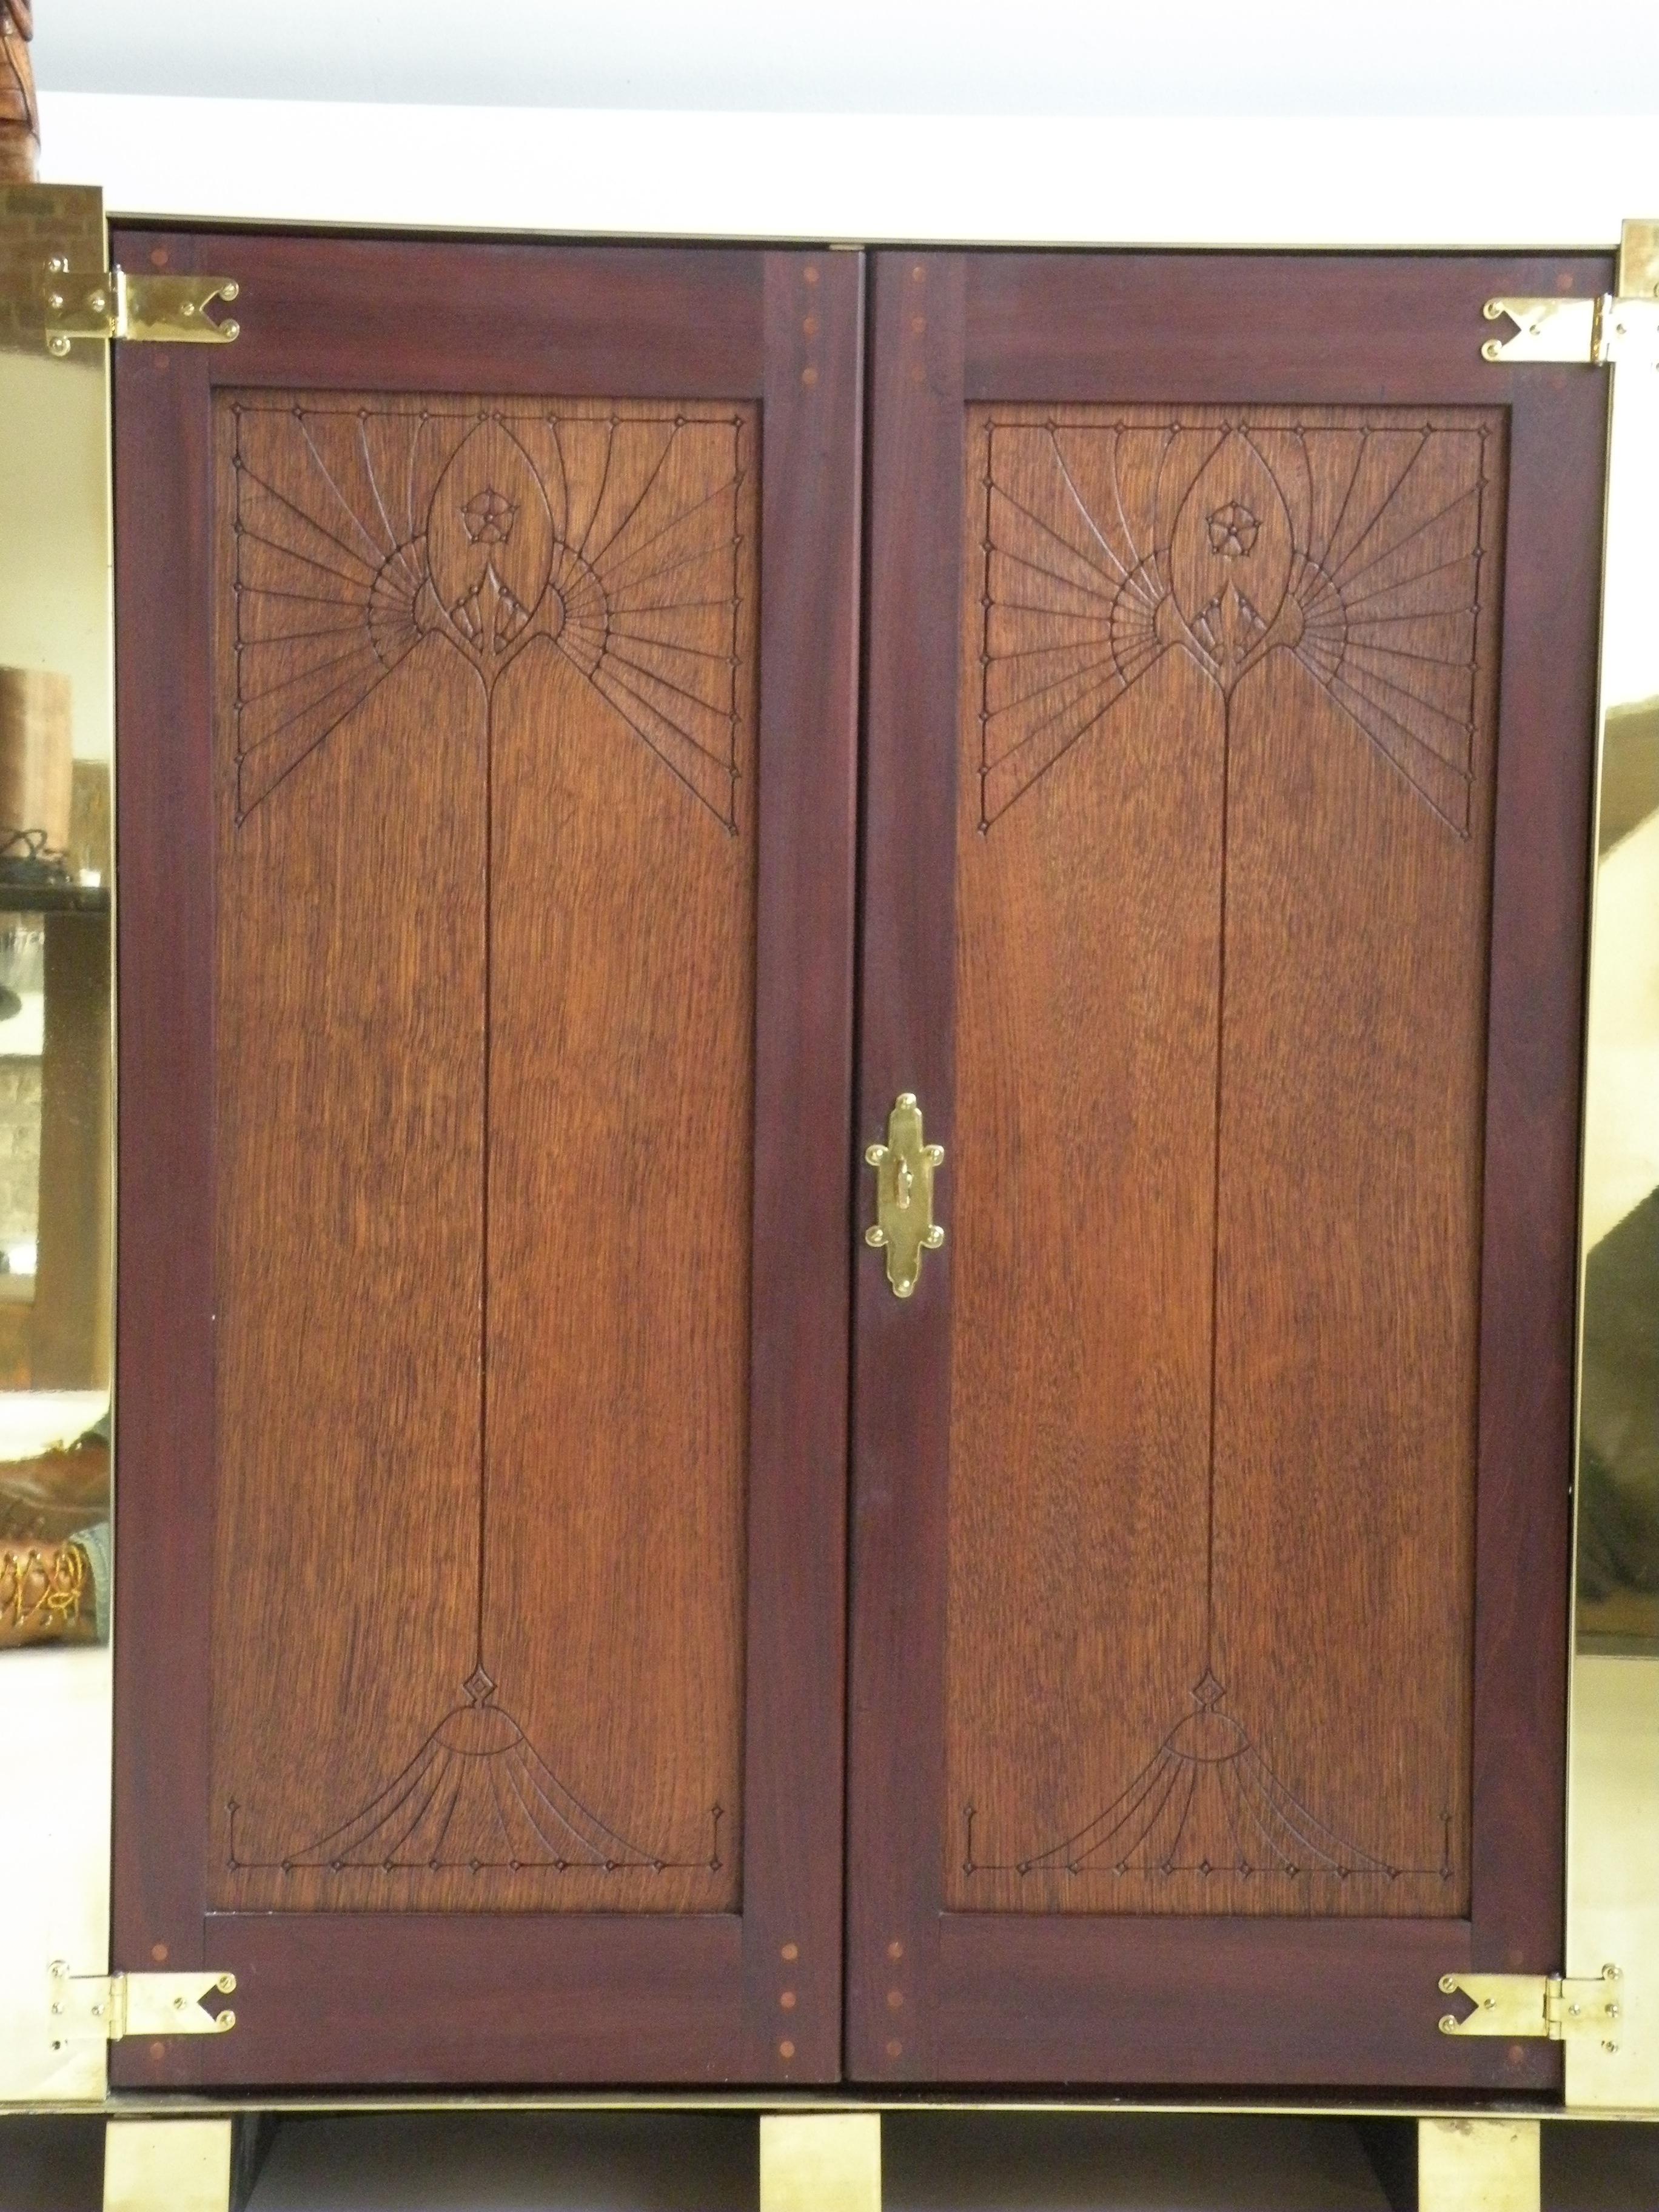 Brass Berlage's Doors, Cabinet with Original Stamped Doors from Opus 14 Cabinet For Sale